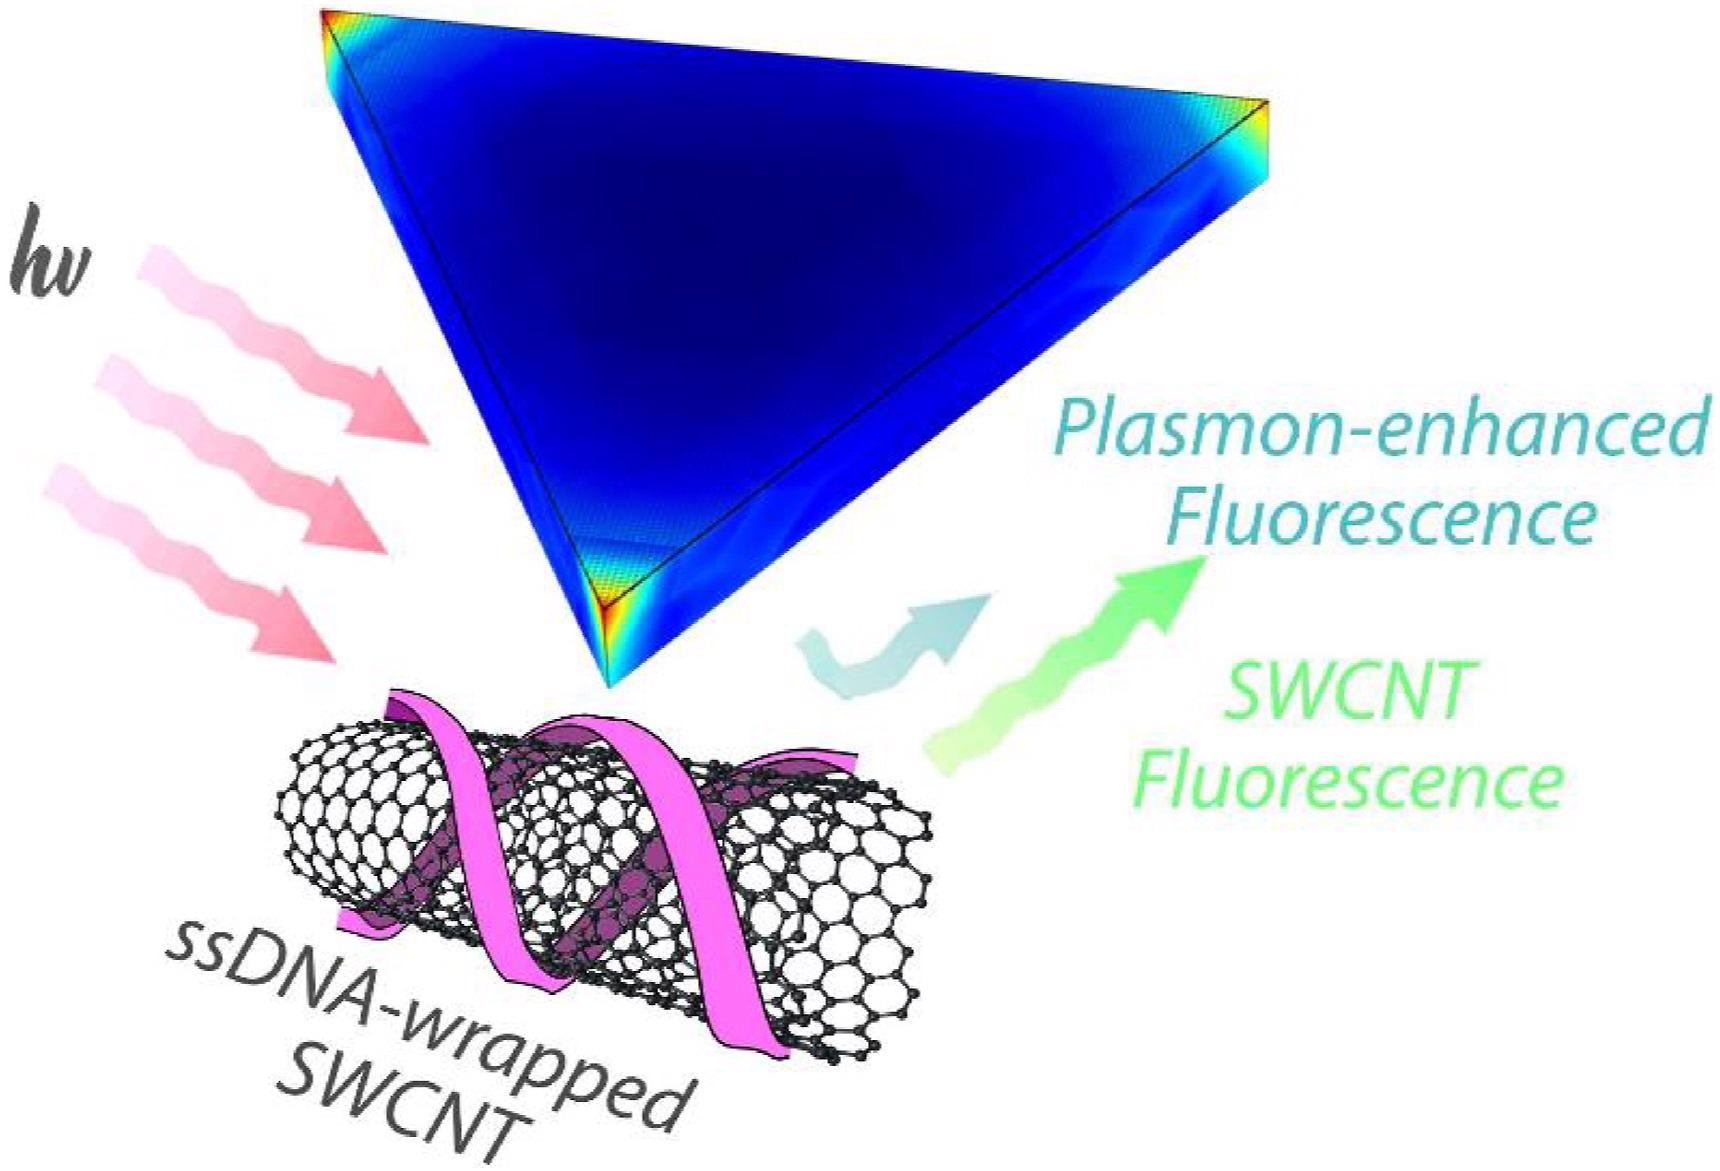 Schematic of ssDNA-wrapped SWCNT in the vicinity of metallic nanostructures that contribute to plasmon-enhanced fluorescence. Upon illumination at resonant wavelengths (red), the metallic nanoparticles show shape, size, and composition-specific plasmonic effects (blue) for enhancing NIR-II SWCNT fluorescence (green). (A colour version of this figure can be viewed online.)